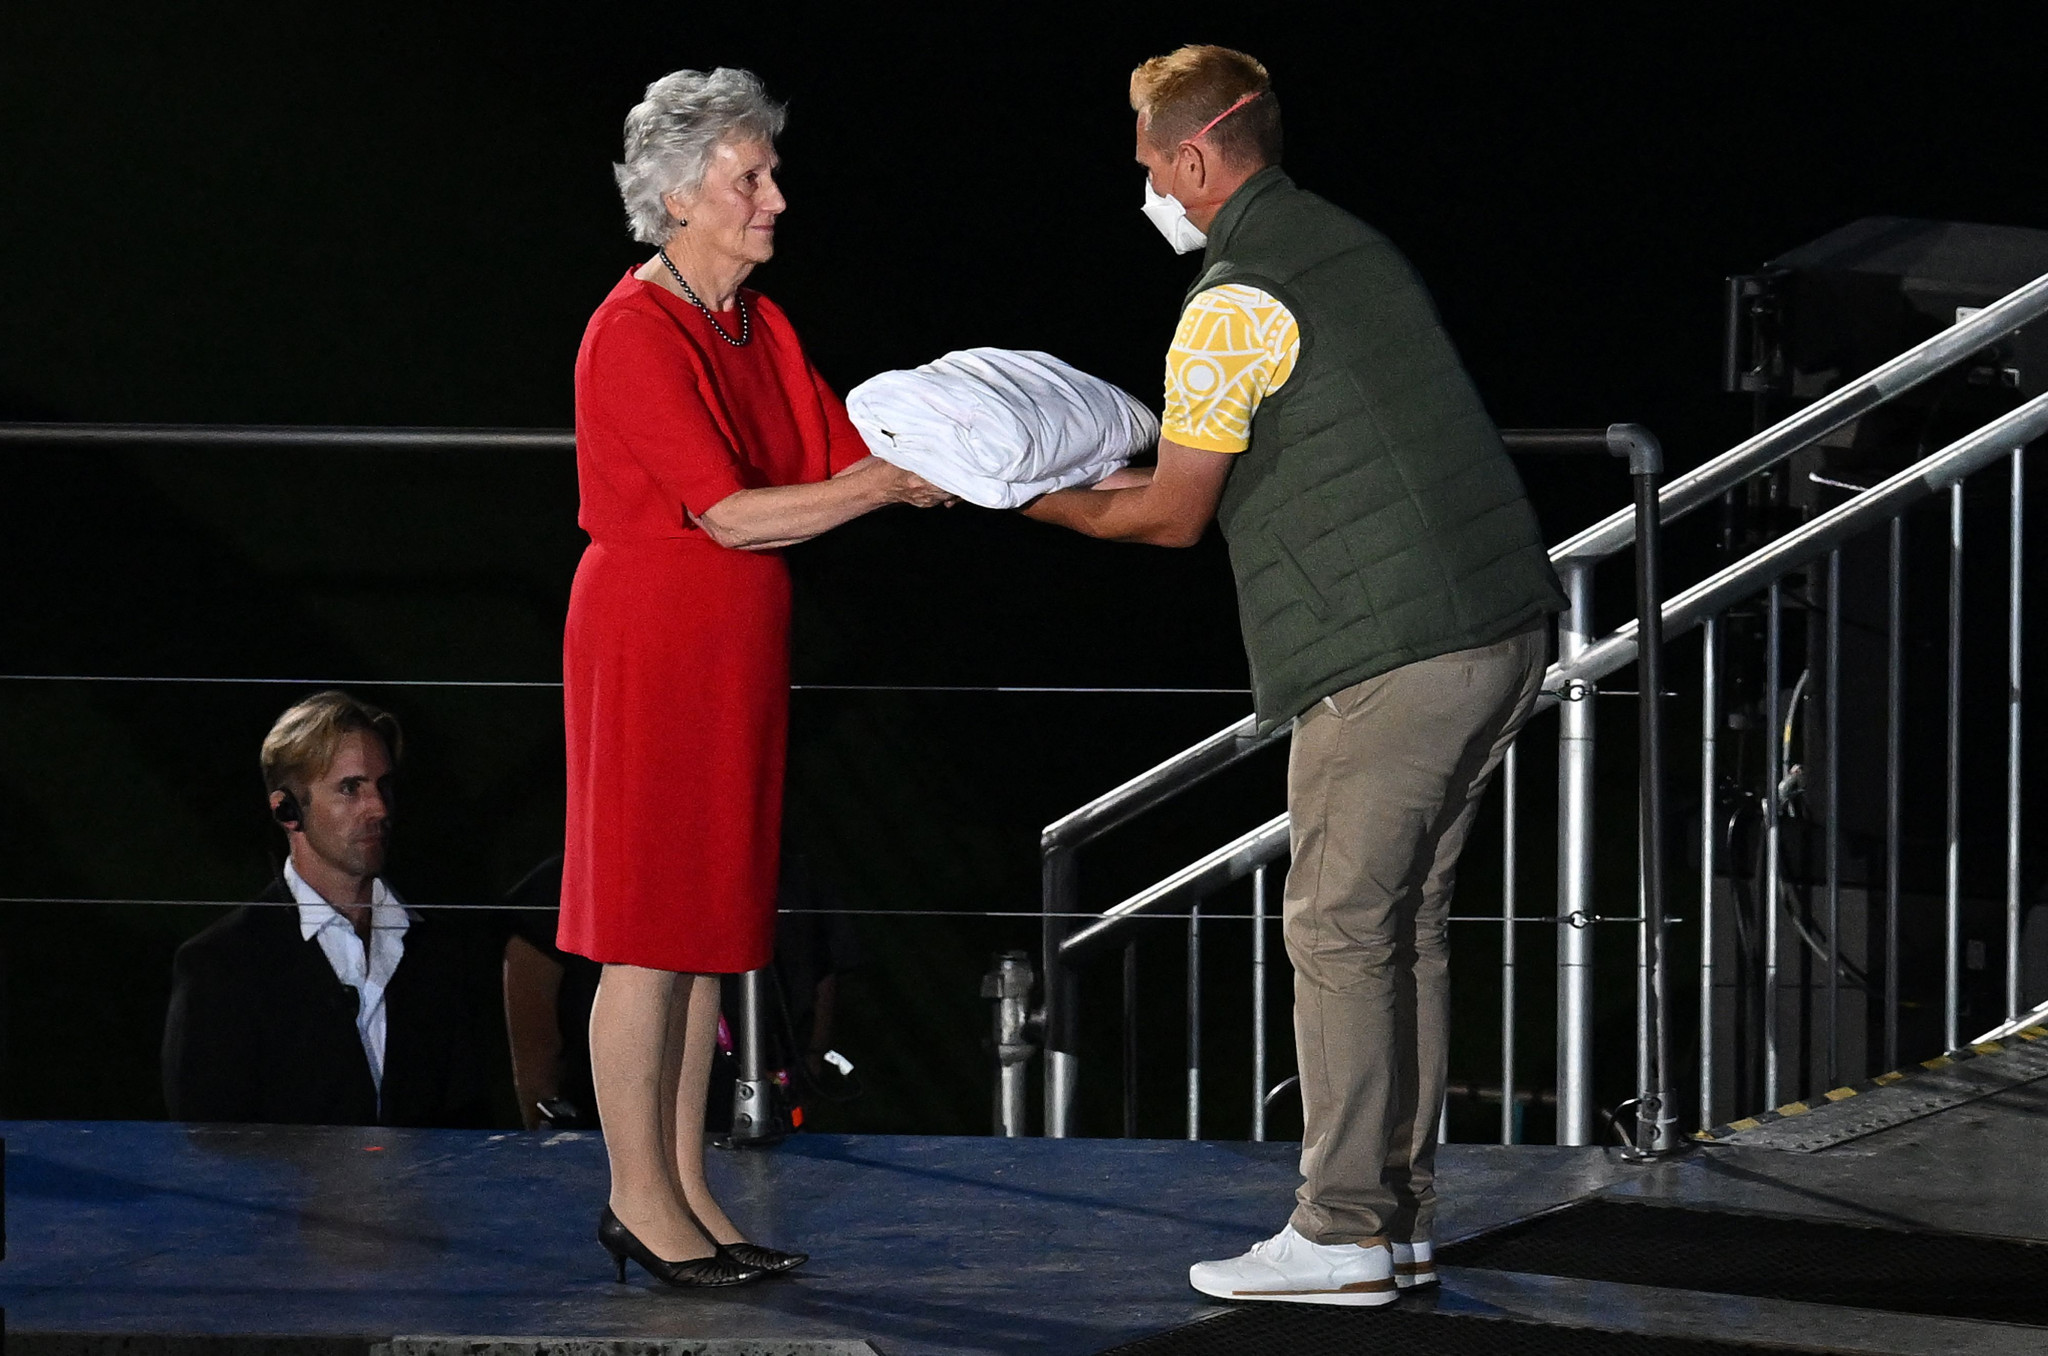 Dame Louise participated in the handover ceremony to mark the countdown to the Victoria 2026 Commonwealth Games ©Getty Images